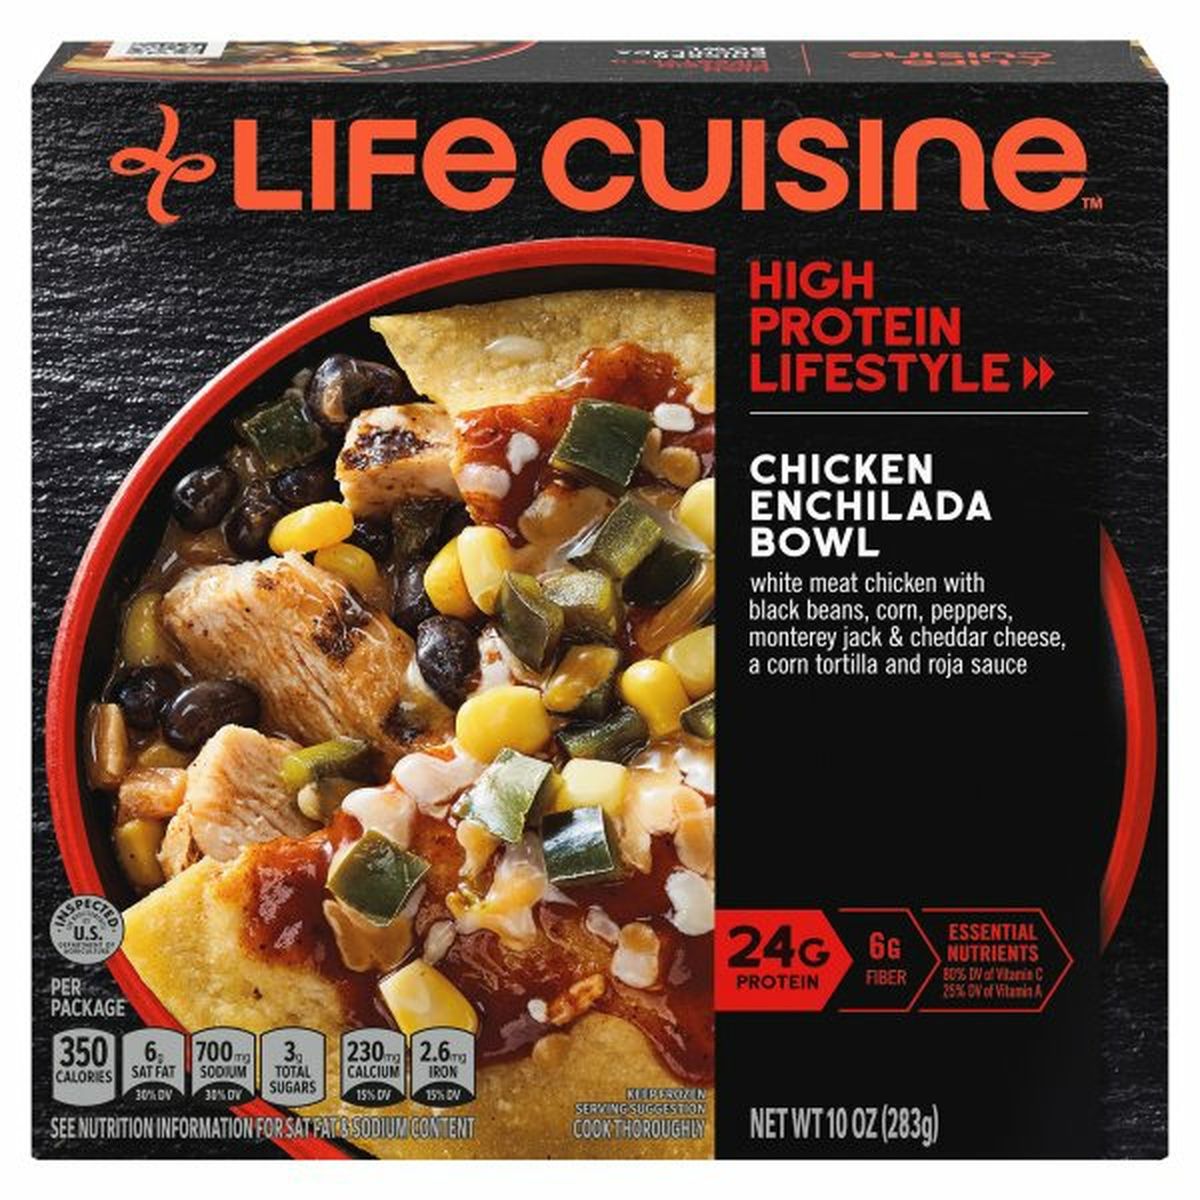 Calories in Life Cuisine Chicken Enchilada Bowl, High Protein Lifestyle